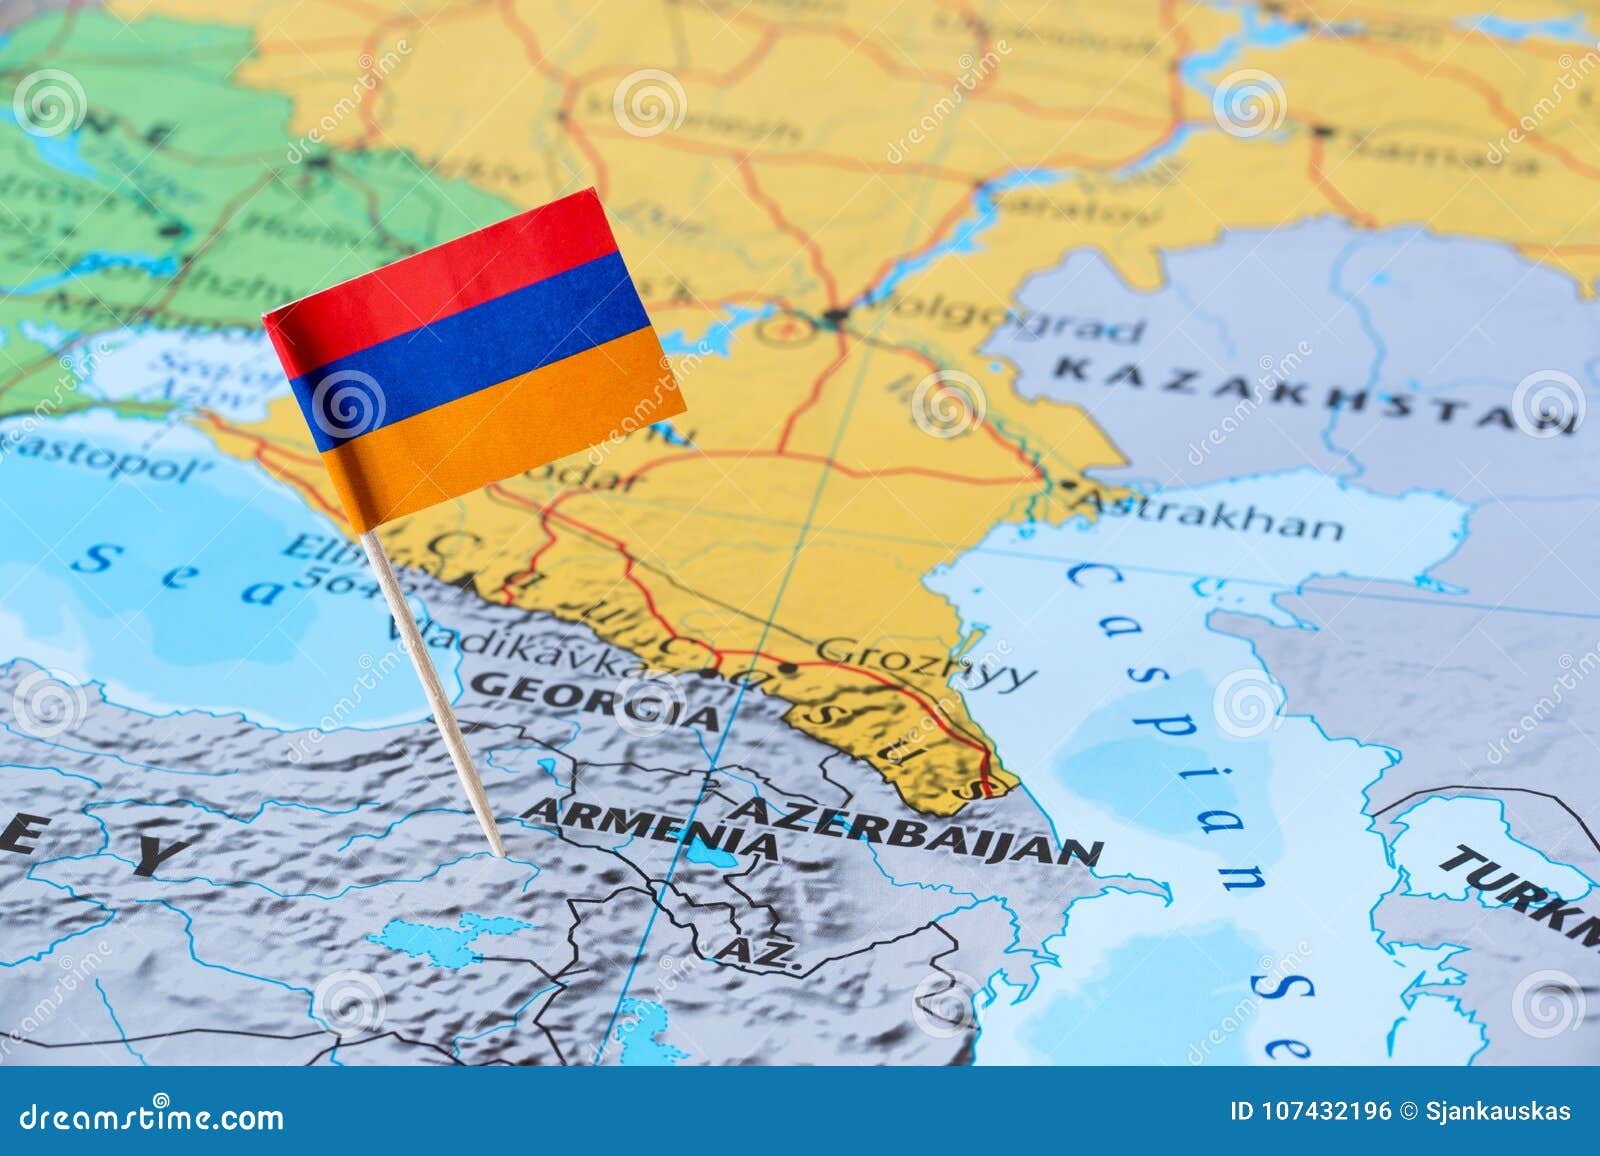 armenia map and flagpin